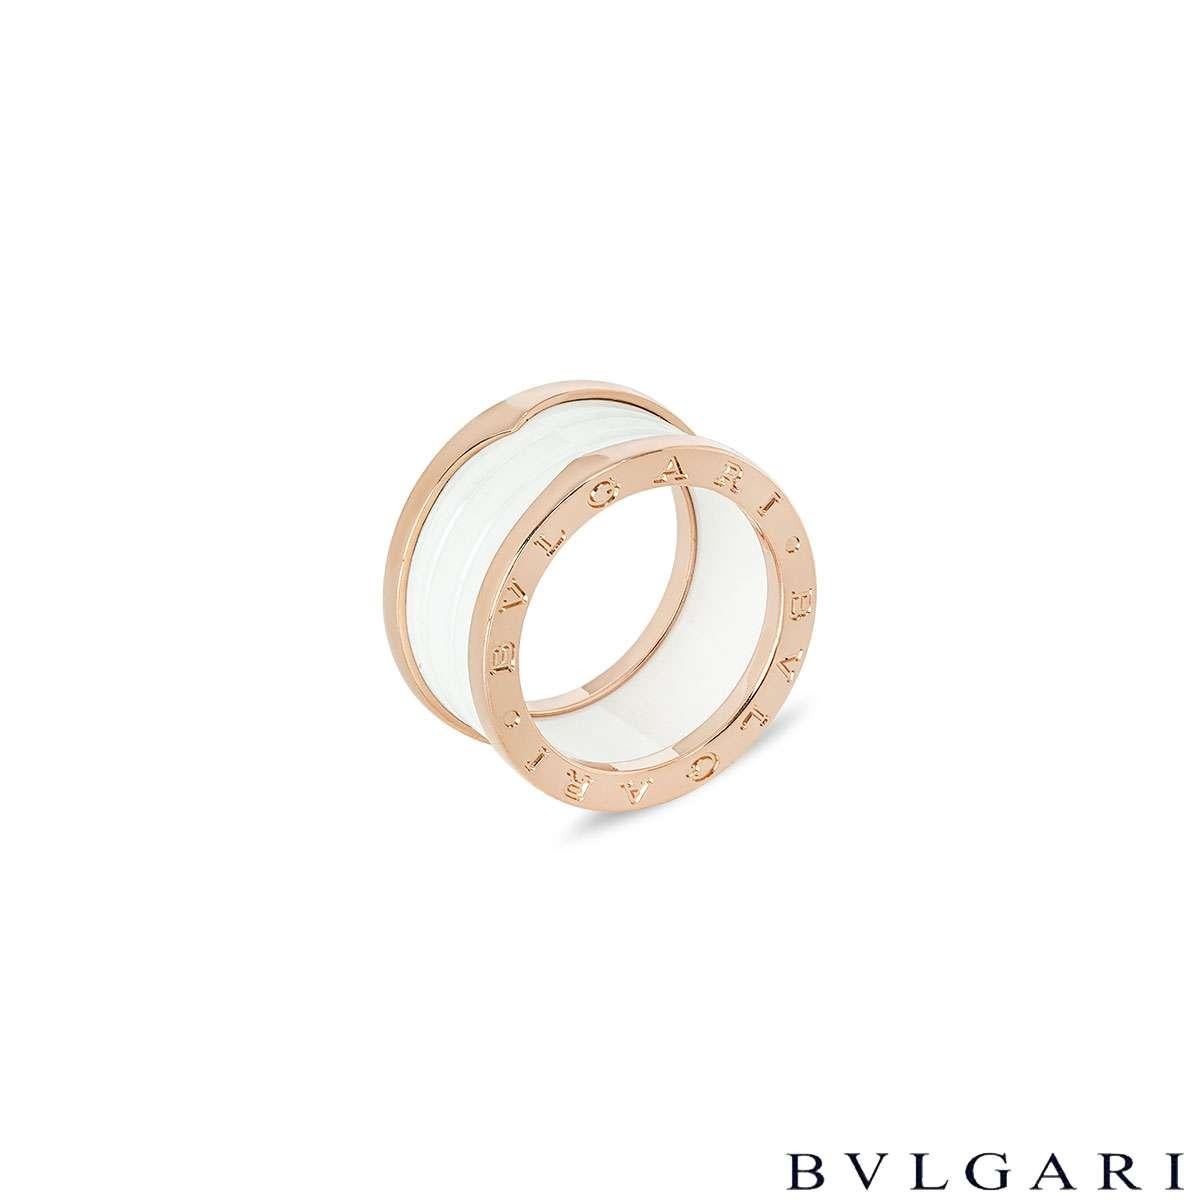 A stunning 18k rose gold ring by Bvlgari, from the B.Zero1 collection. Features a white ceramic spiral design, encased by rose gold bands on the top and bottom. The iconic 'BVLGARI BVLGARI' logo is engraved around the edges of the bands. This ring